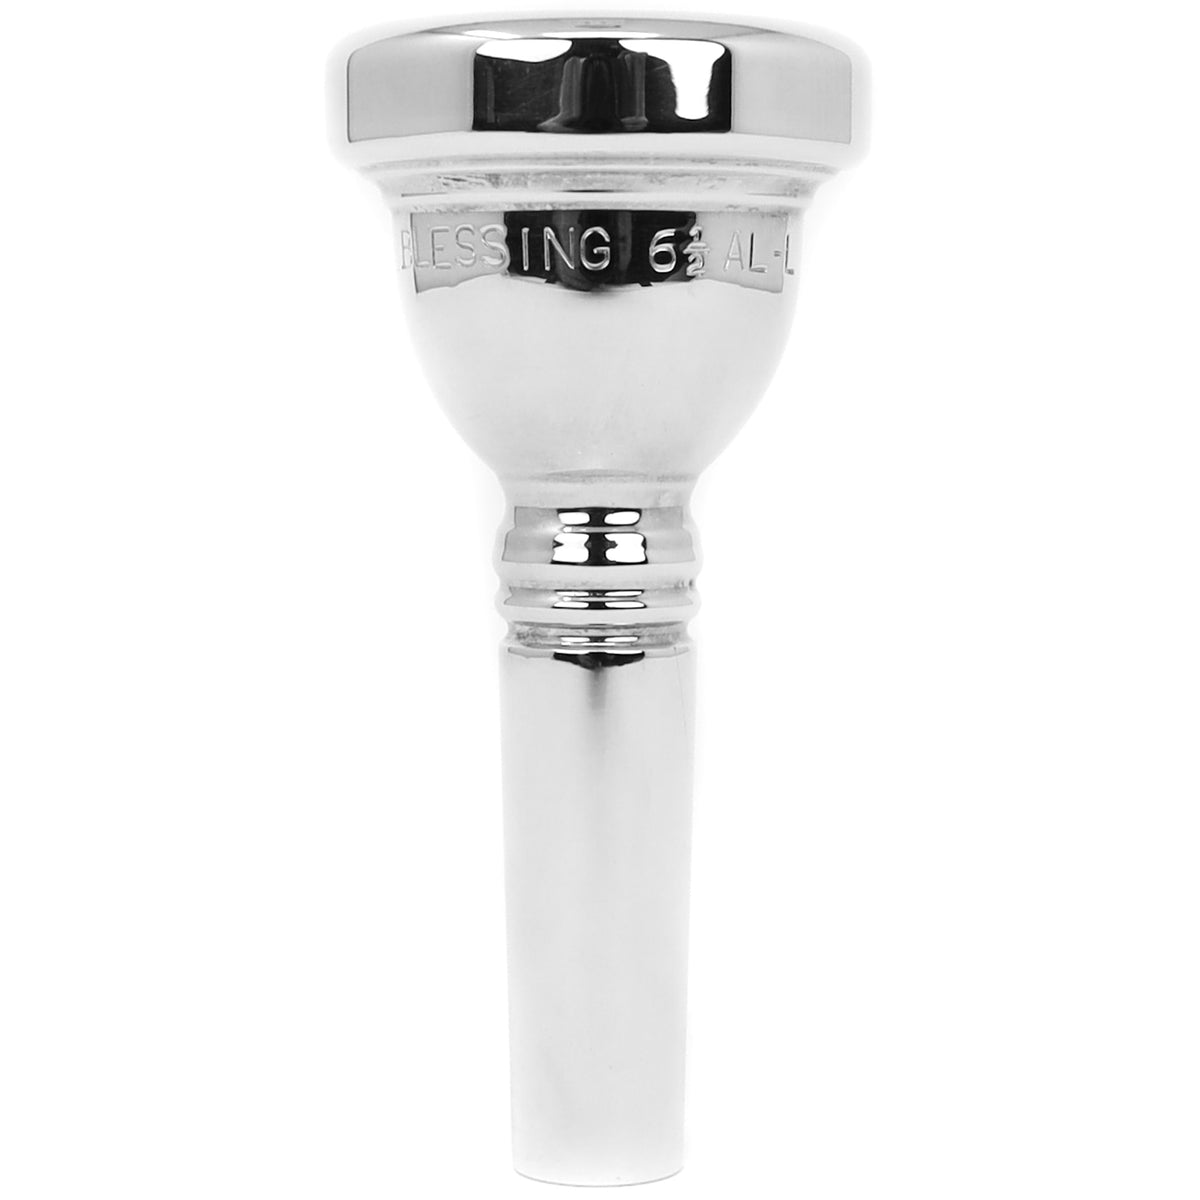 Blessing MPC3CCR Cornet Mouthpieces in Silver, 3C